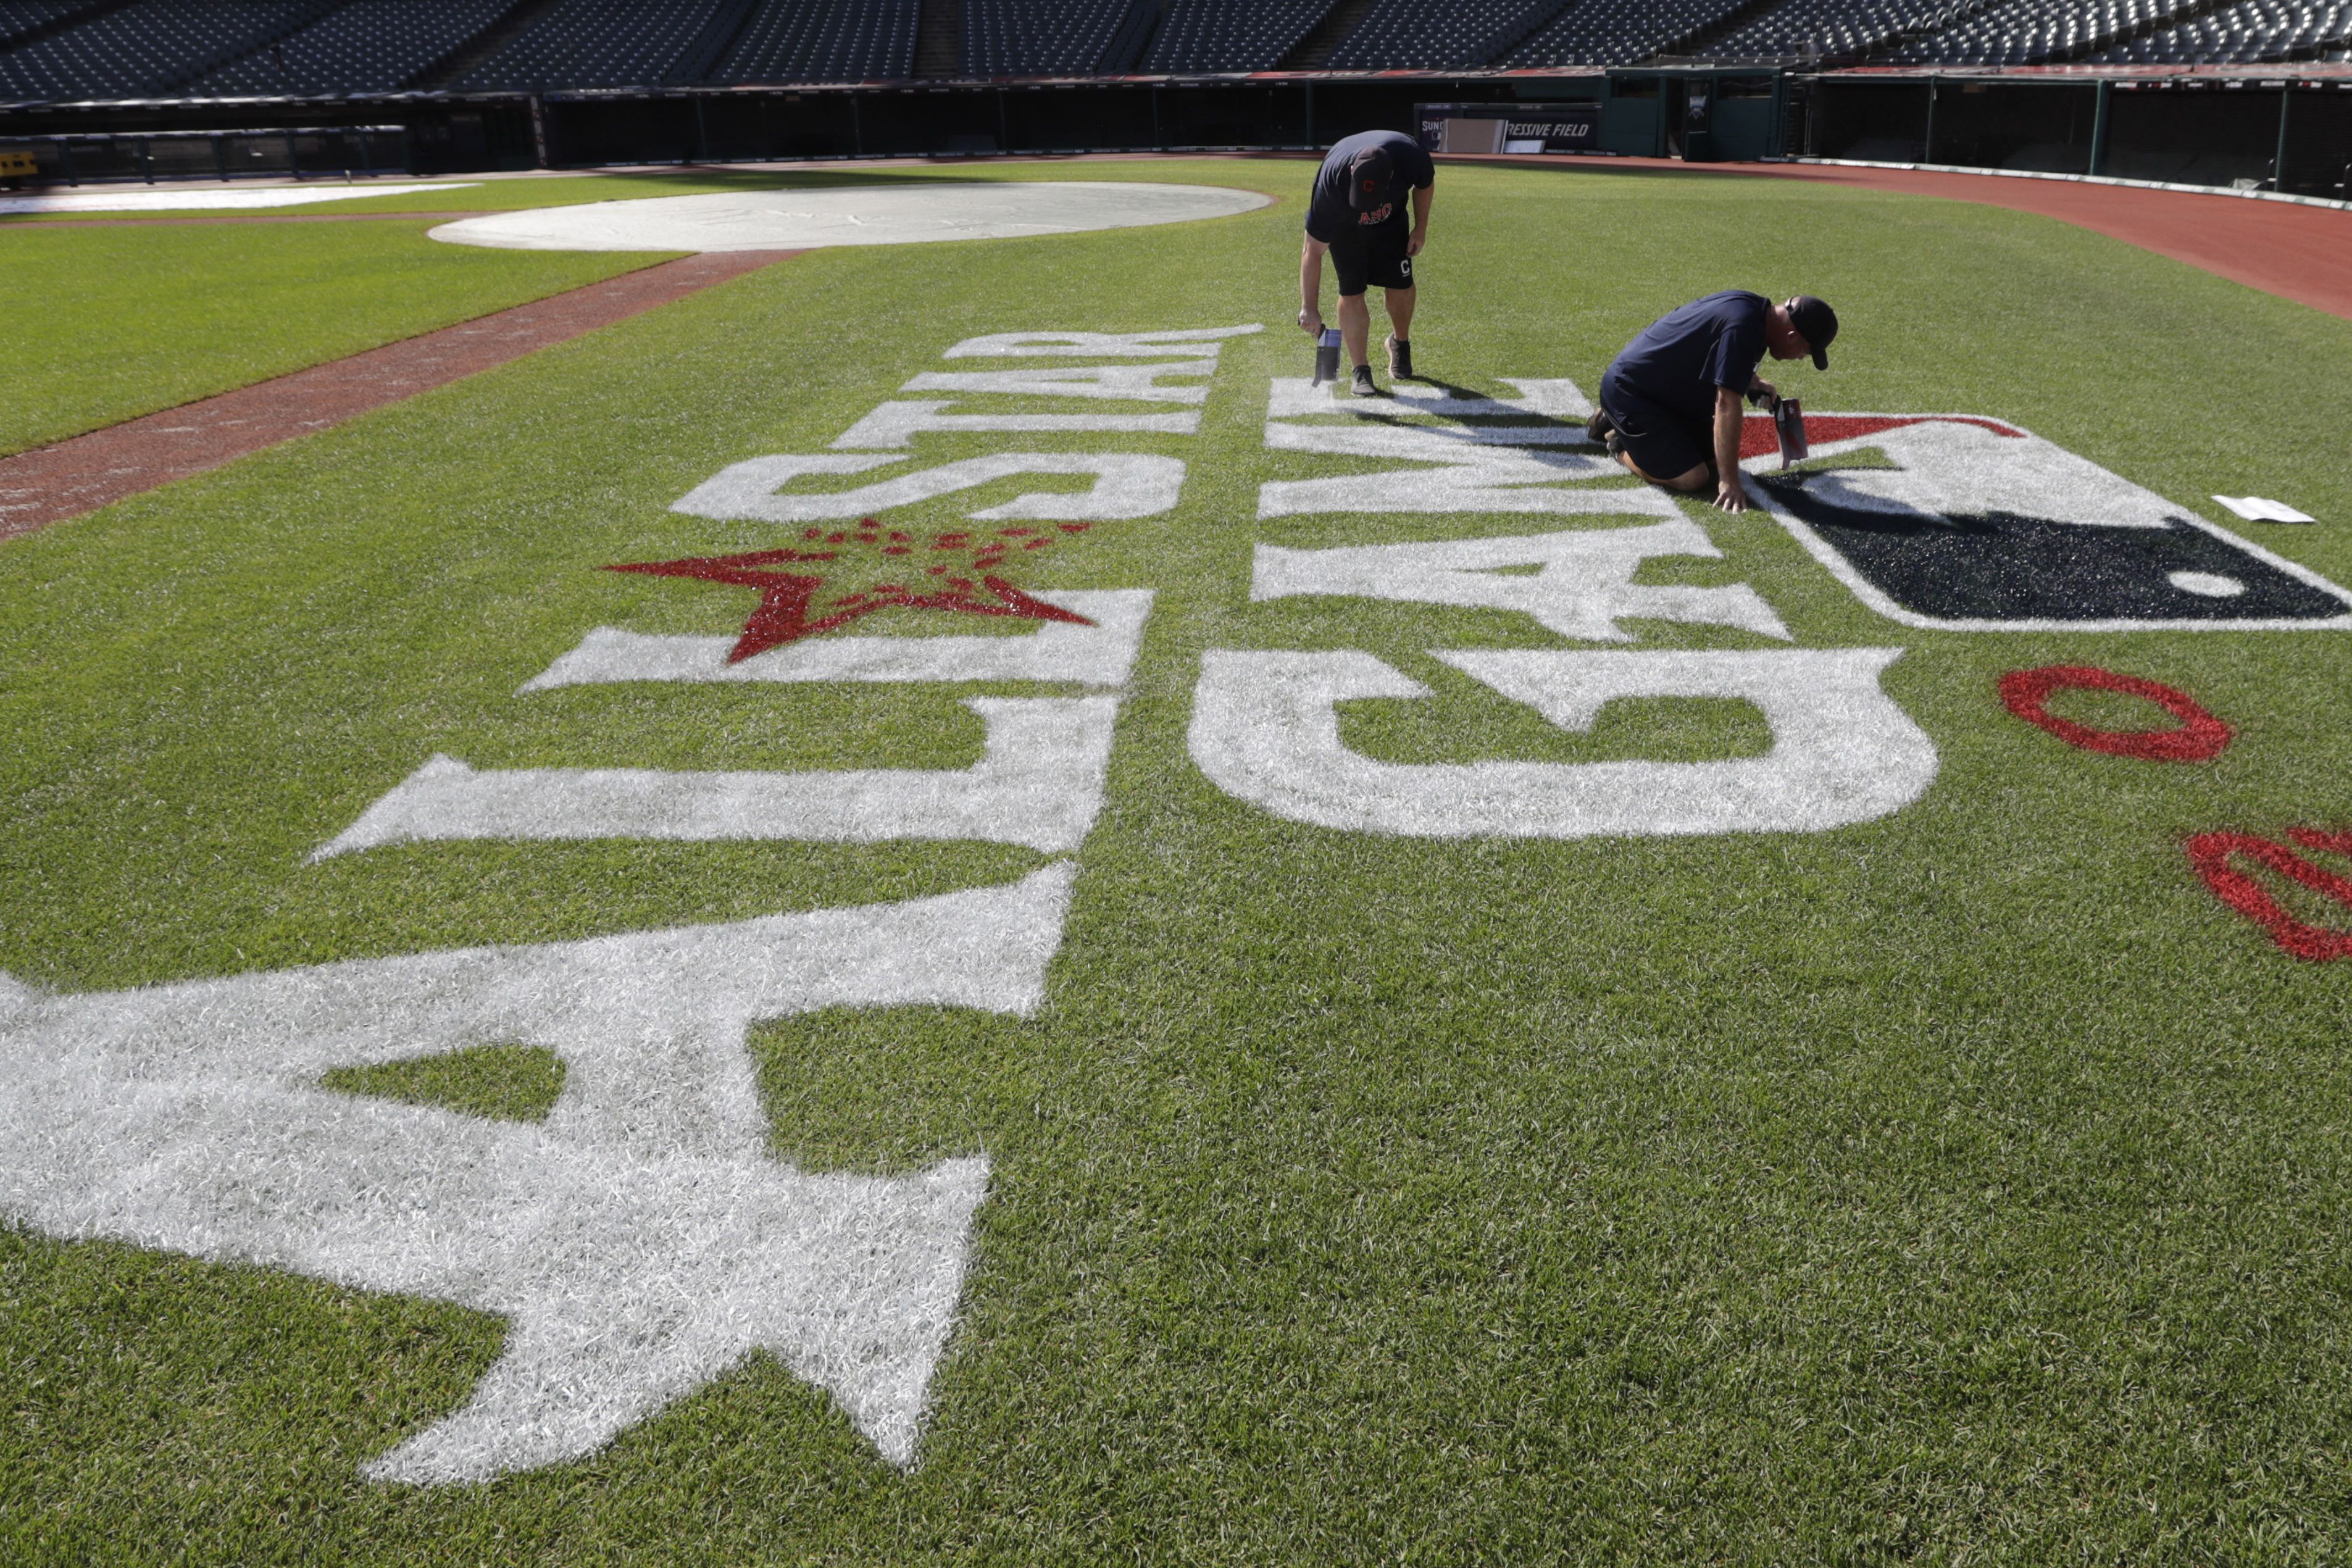 Indians finalize ticket distribution plans for 2019 MLB All-Star Game